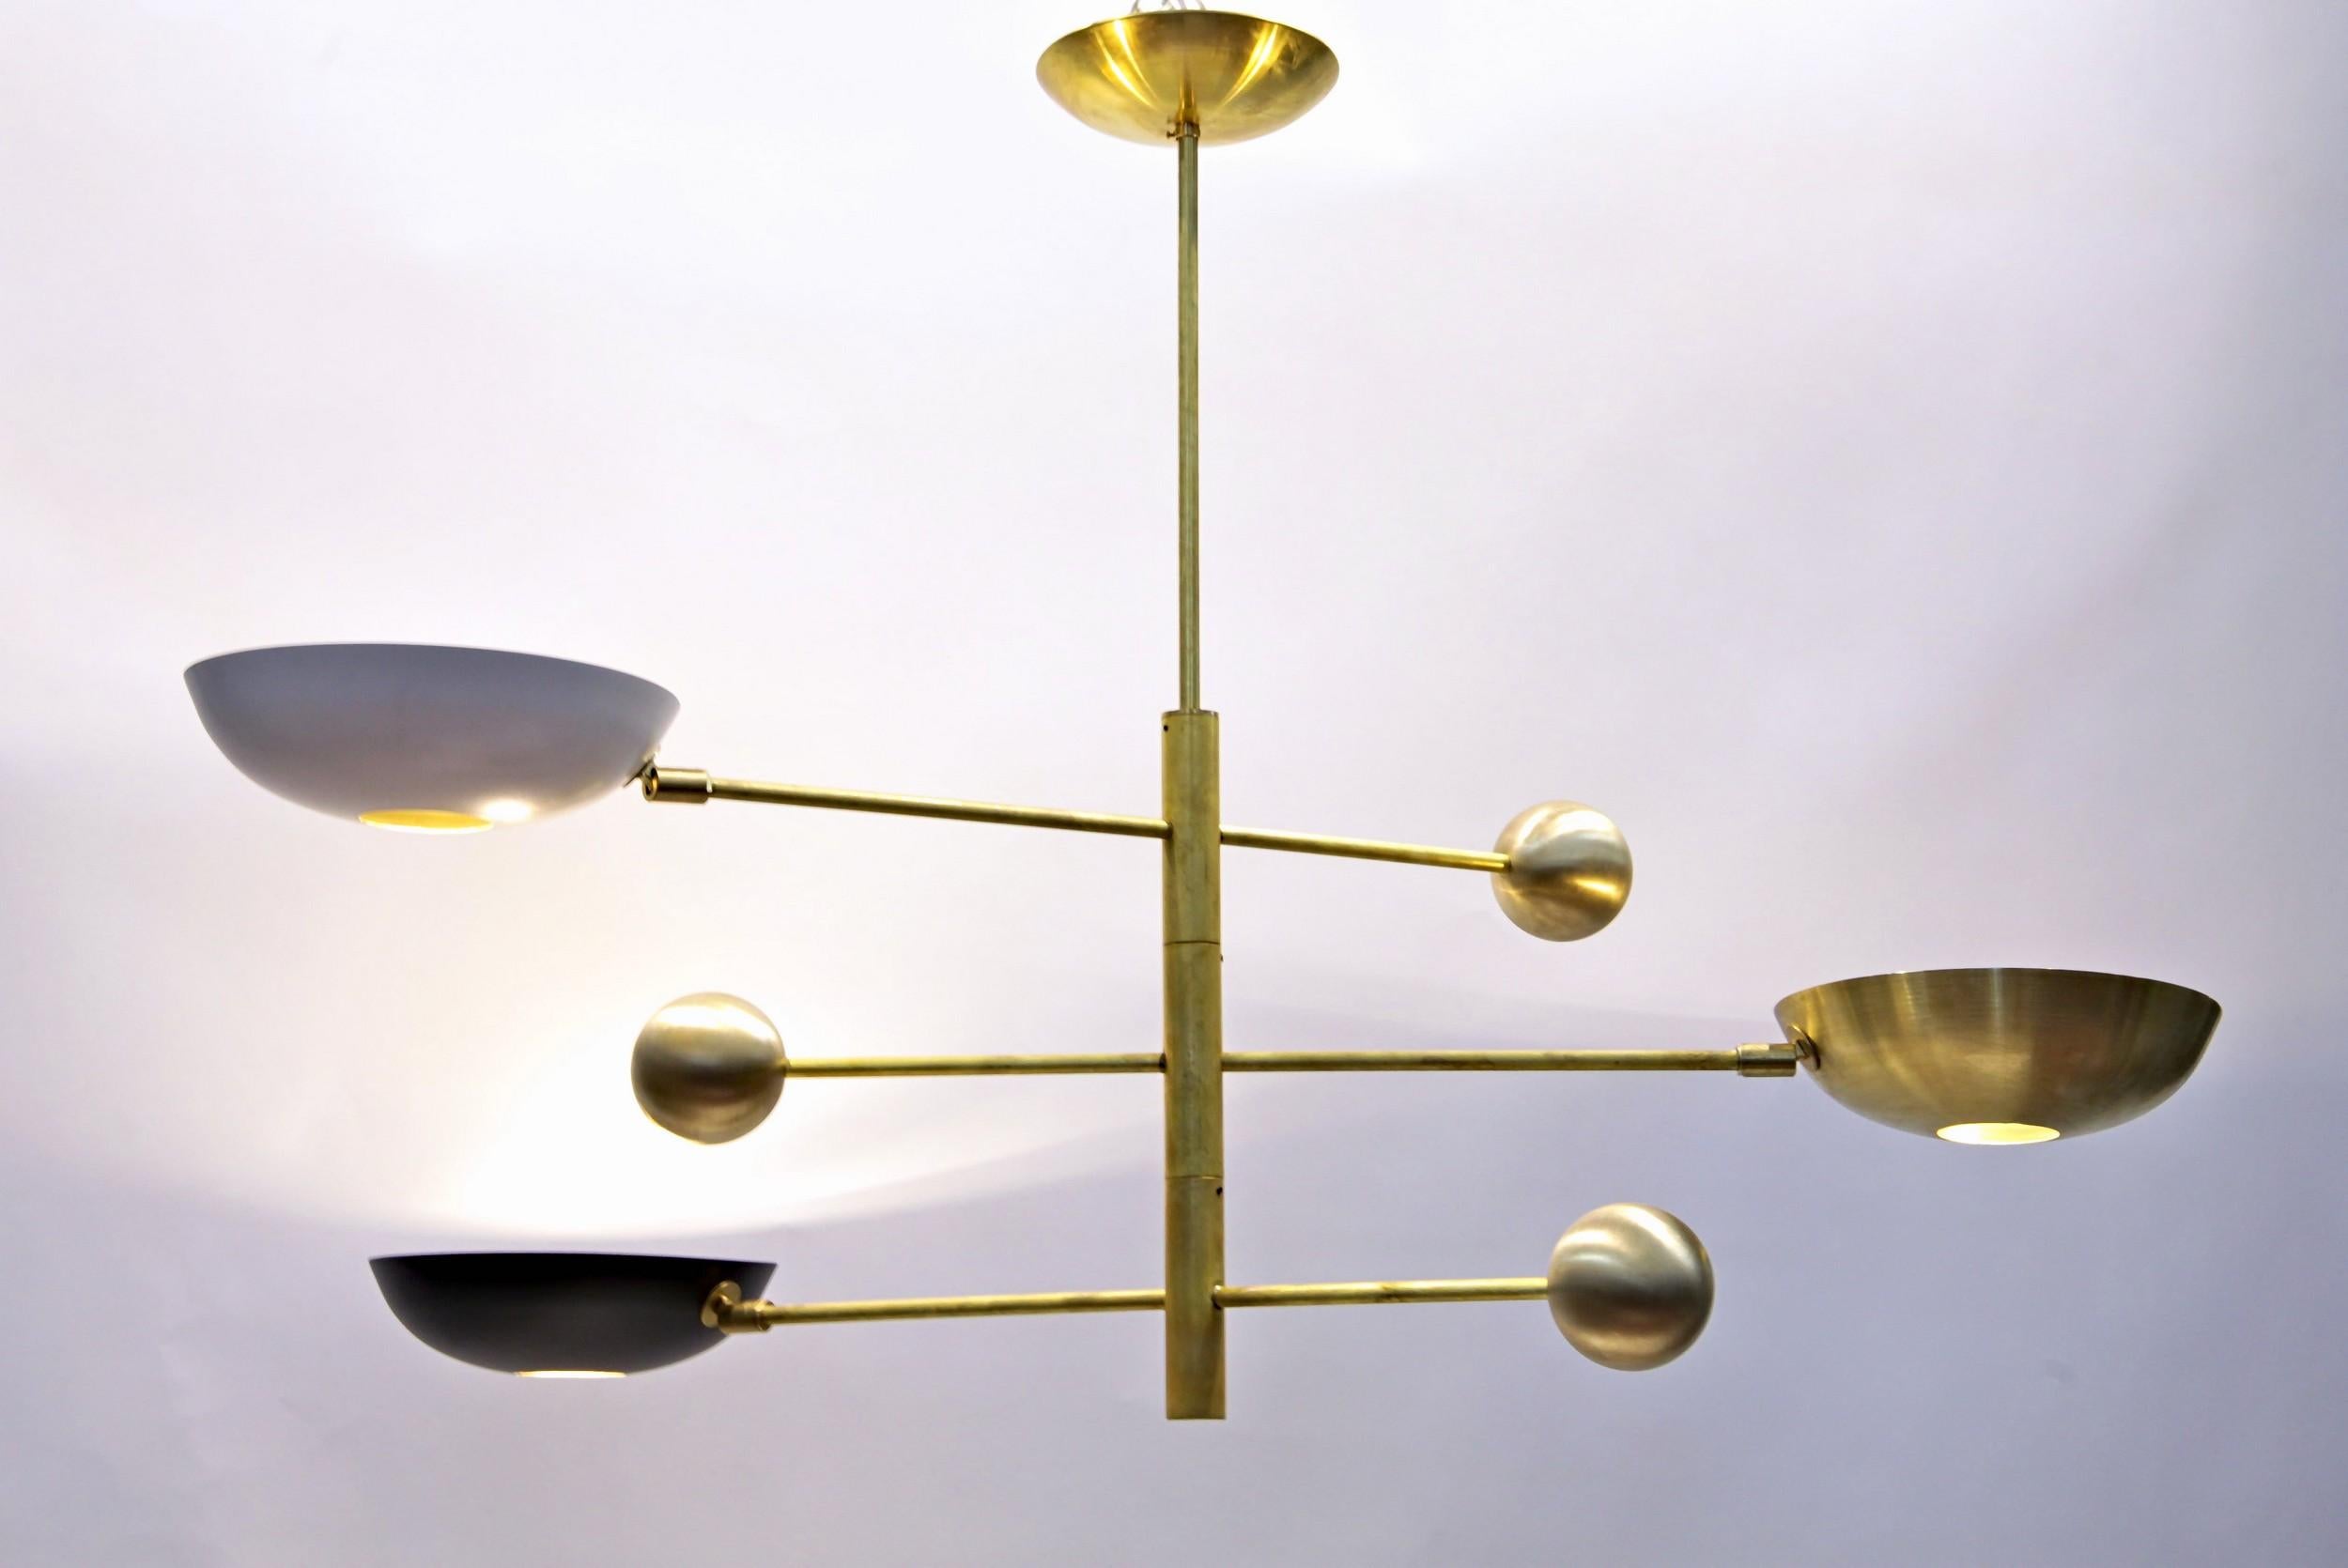 Orbitale Brass Chandelier 3 Rotating Balanced Arms, 120 cm 48 inches diameter For Sale 4